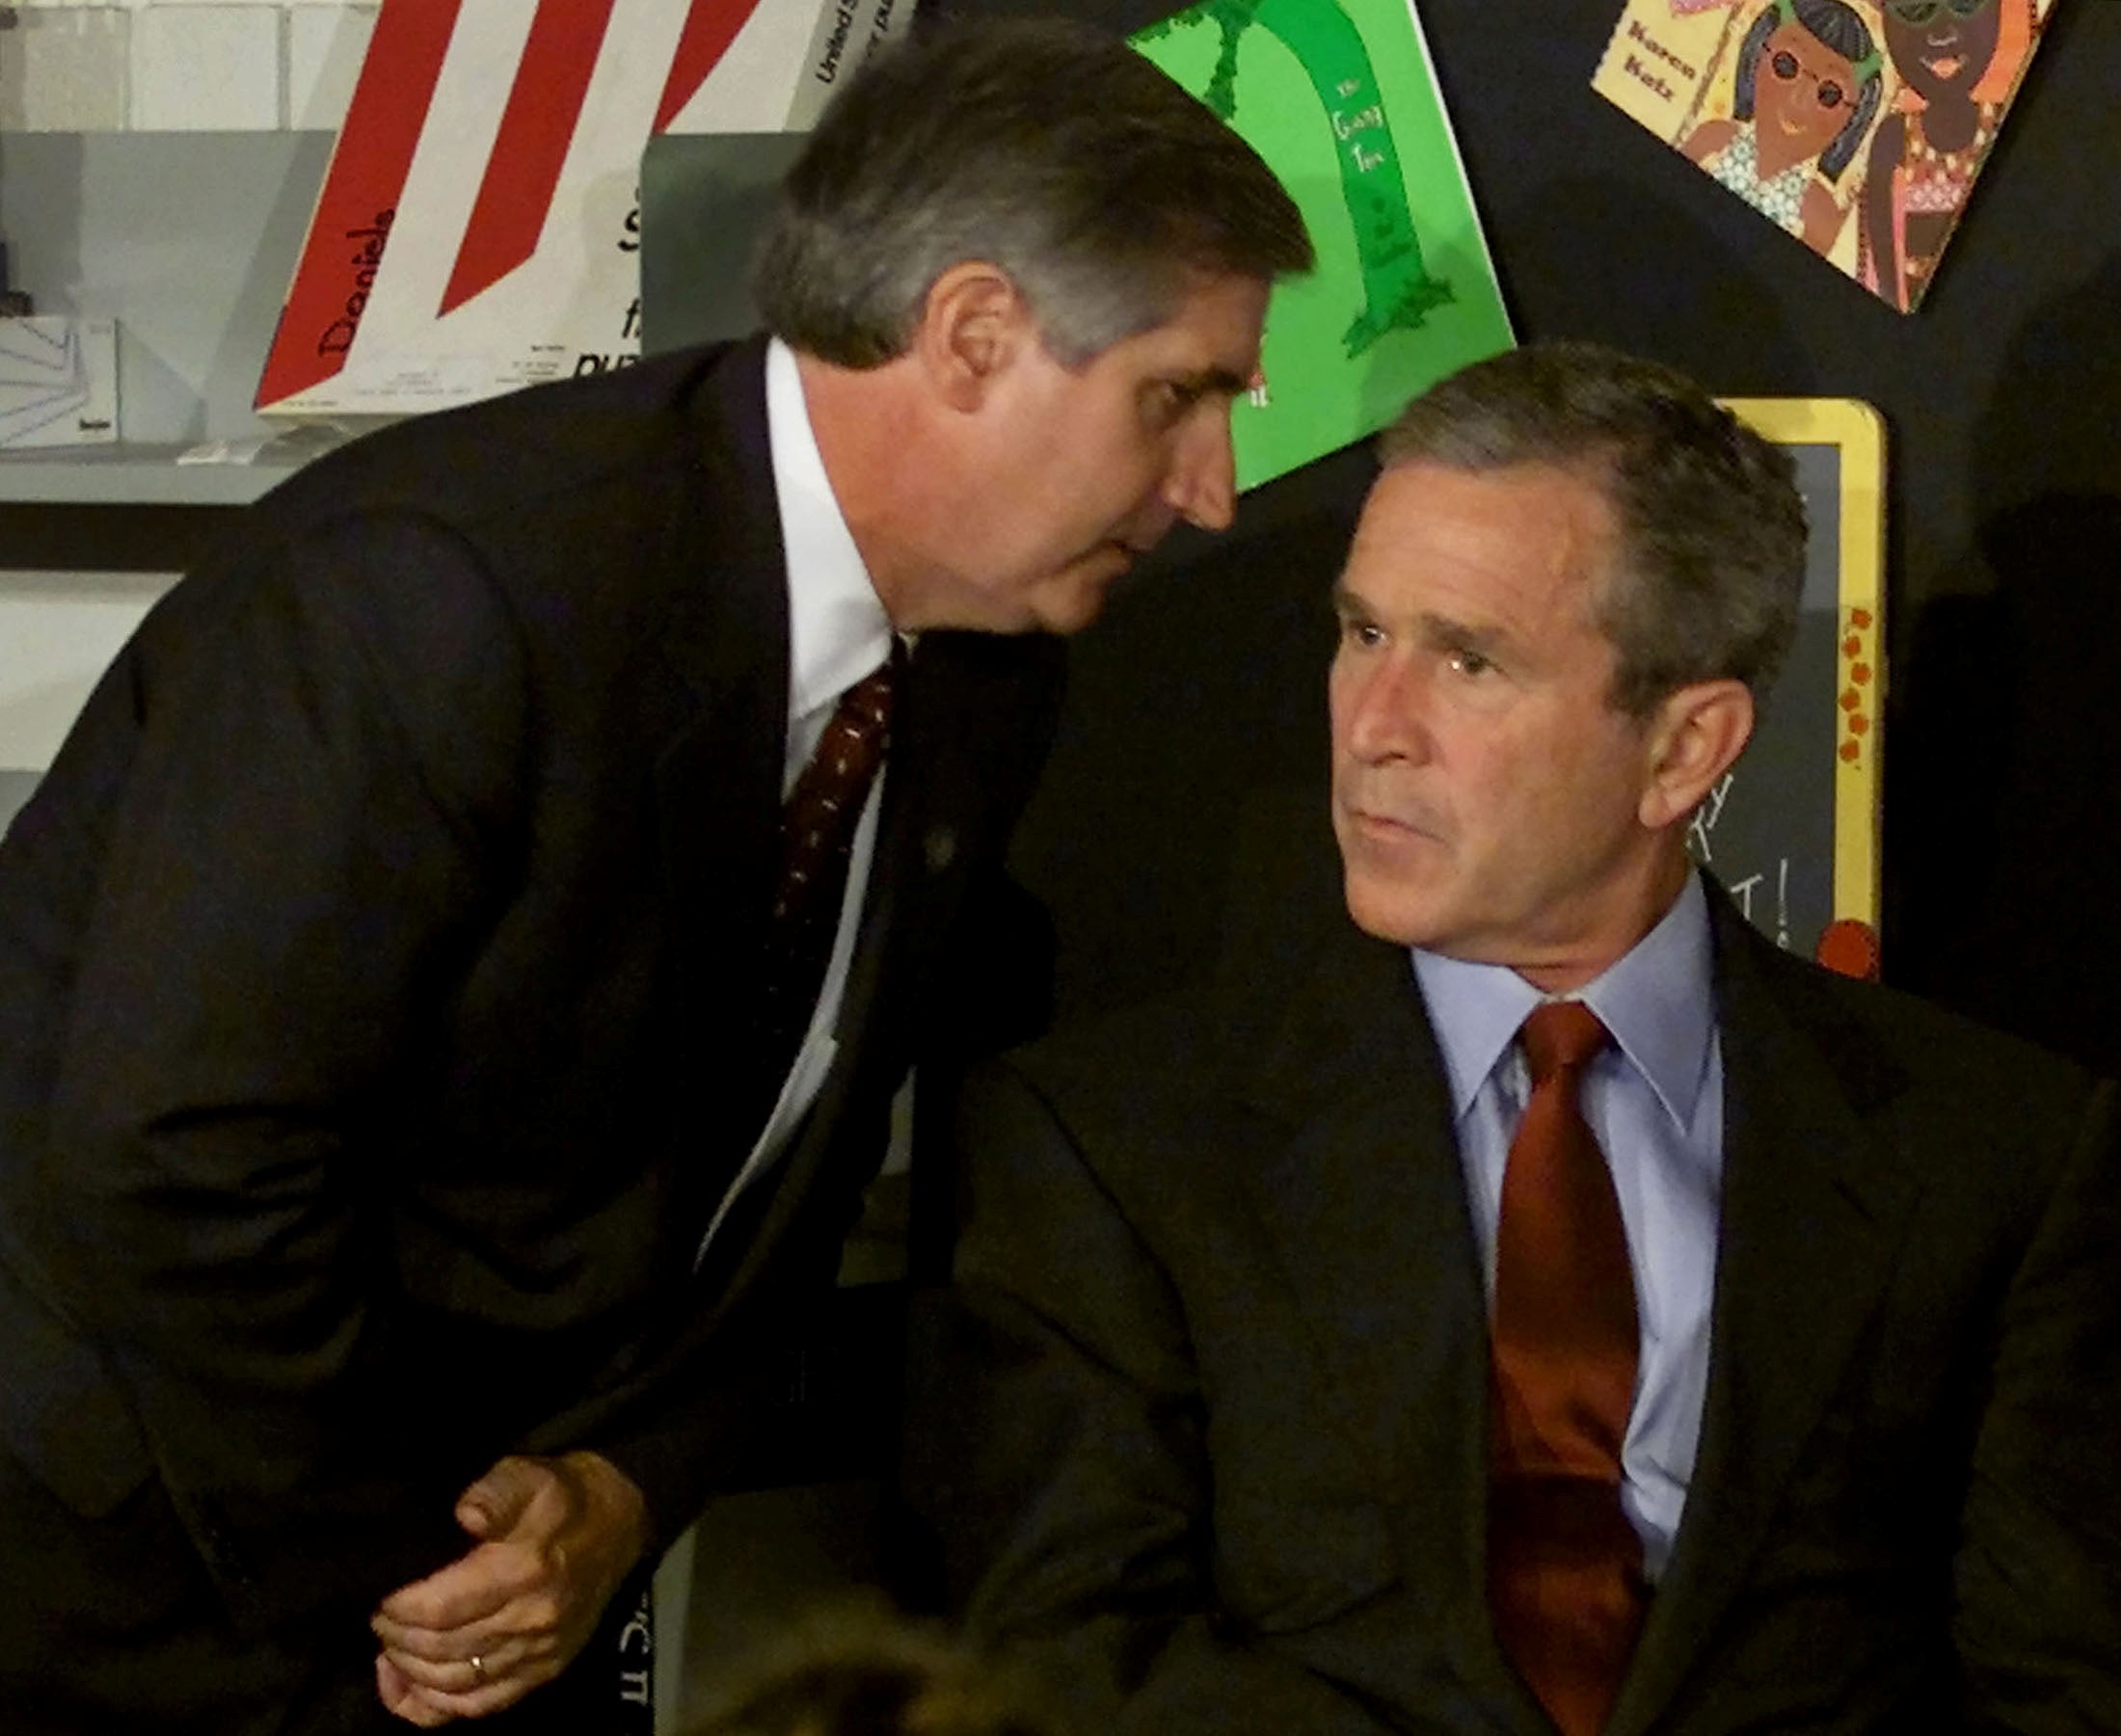 US President George W Bush listens as White House Chief of Staff Andrew Card informs him of a second plane hitting the World Trade Center. Bush was conducting a reading seminar at the Emma E Booker Elementary School, in Sarasota, Florida